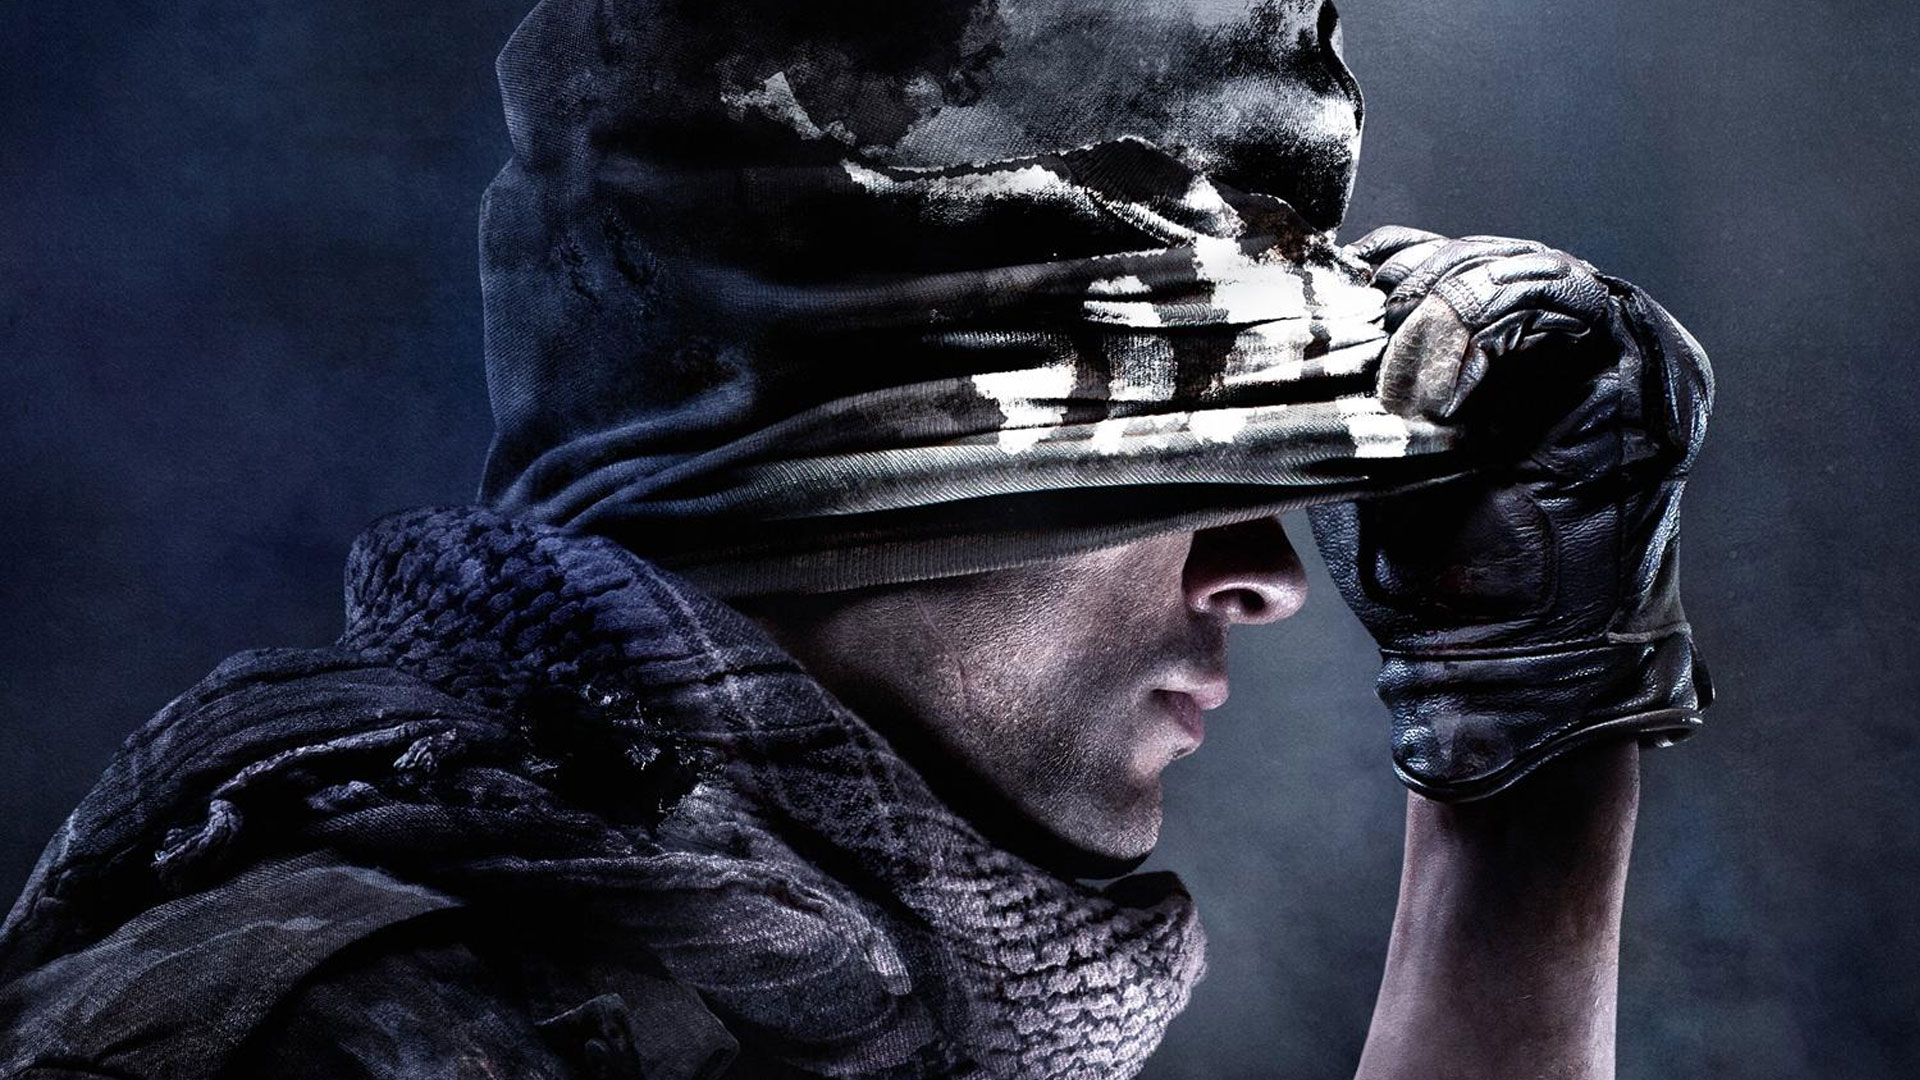 Call Of Duty Ghosts Riley Wallpaper 1920x1080 Call of duty 1920x1080